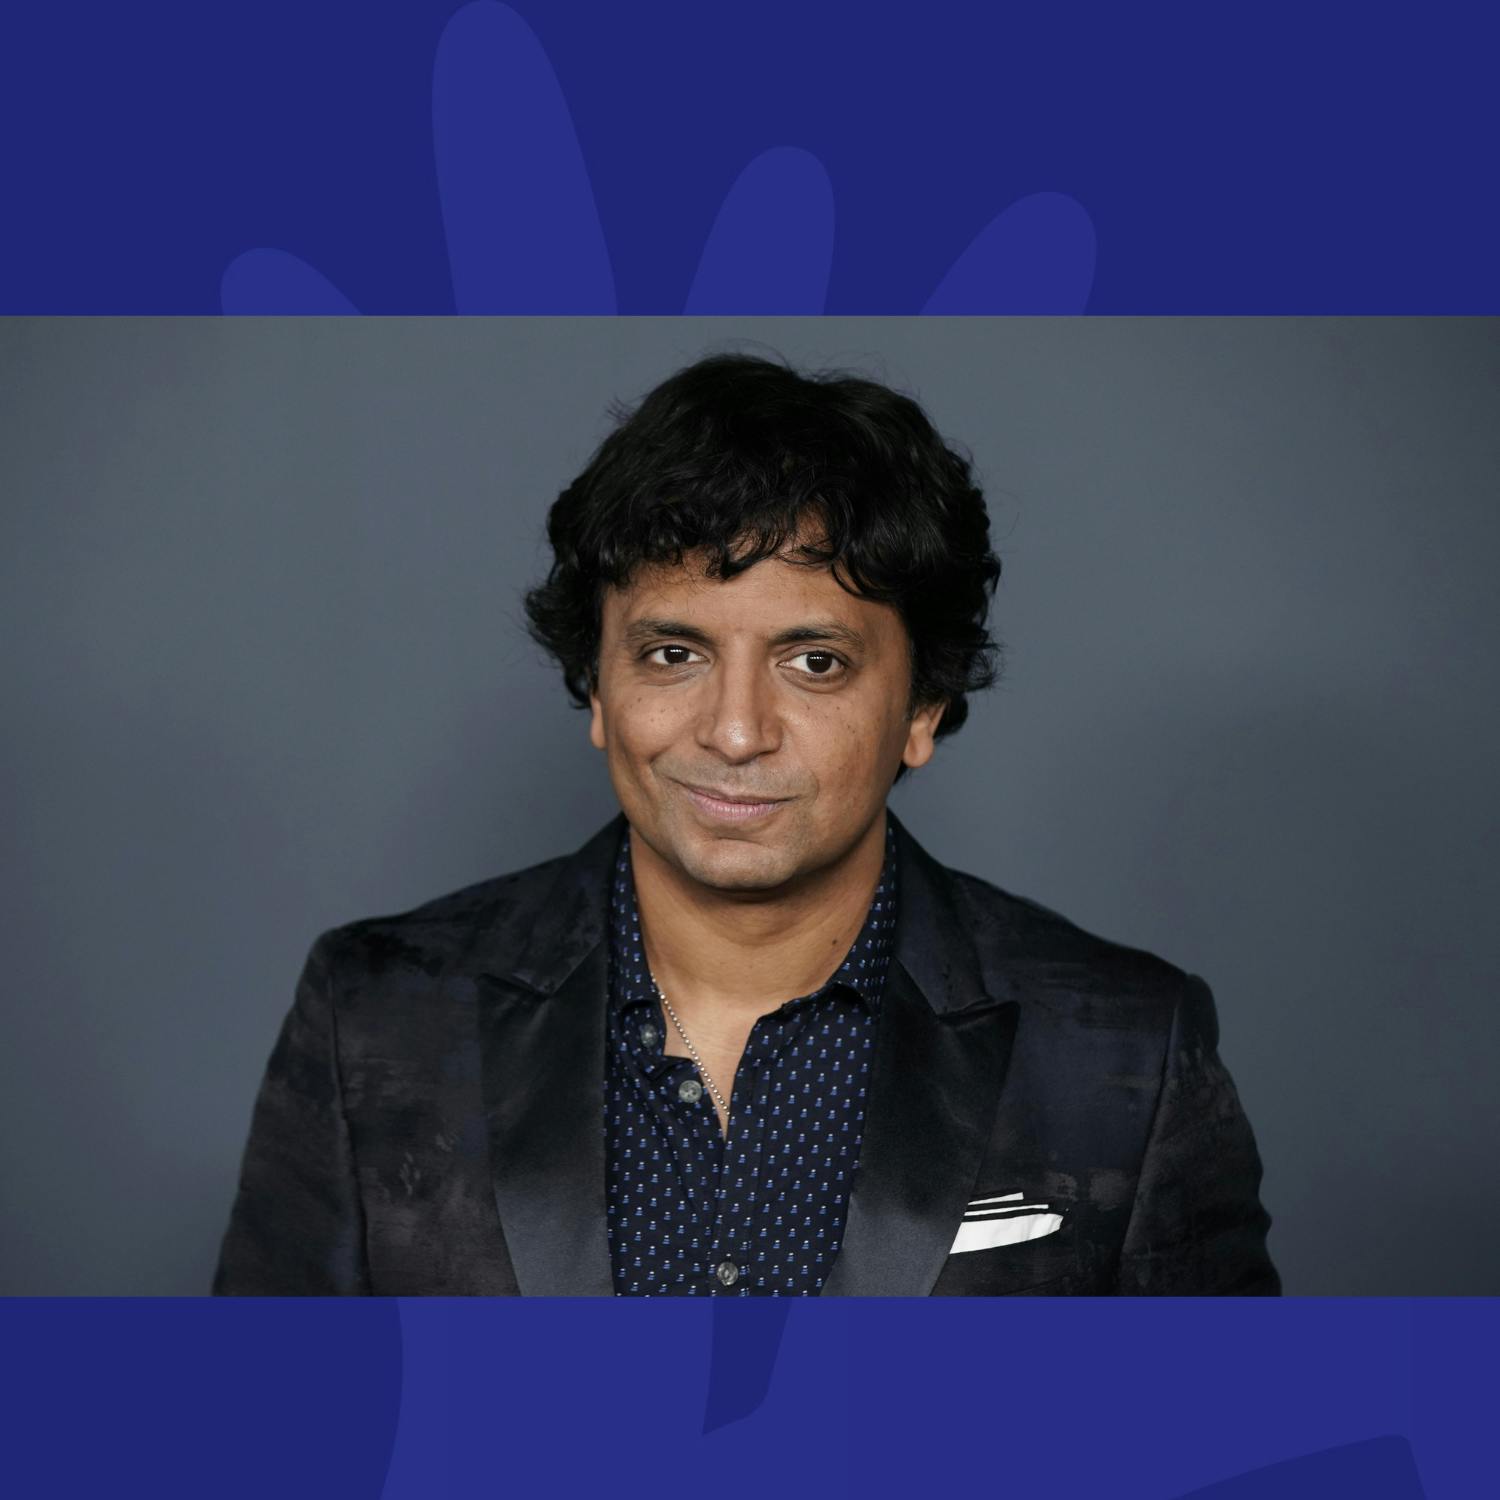 Rocking, Fire Alarms And M. Night Shyamalan-Picture This Reveal Very Odd Sleeping Habits